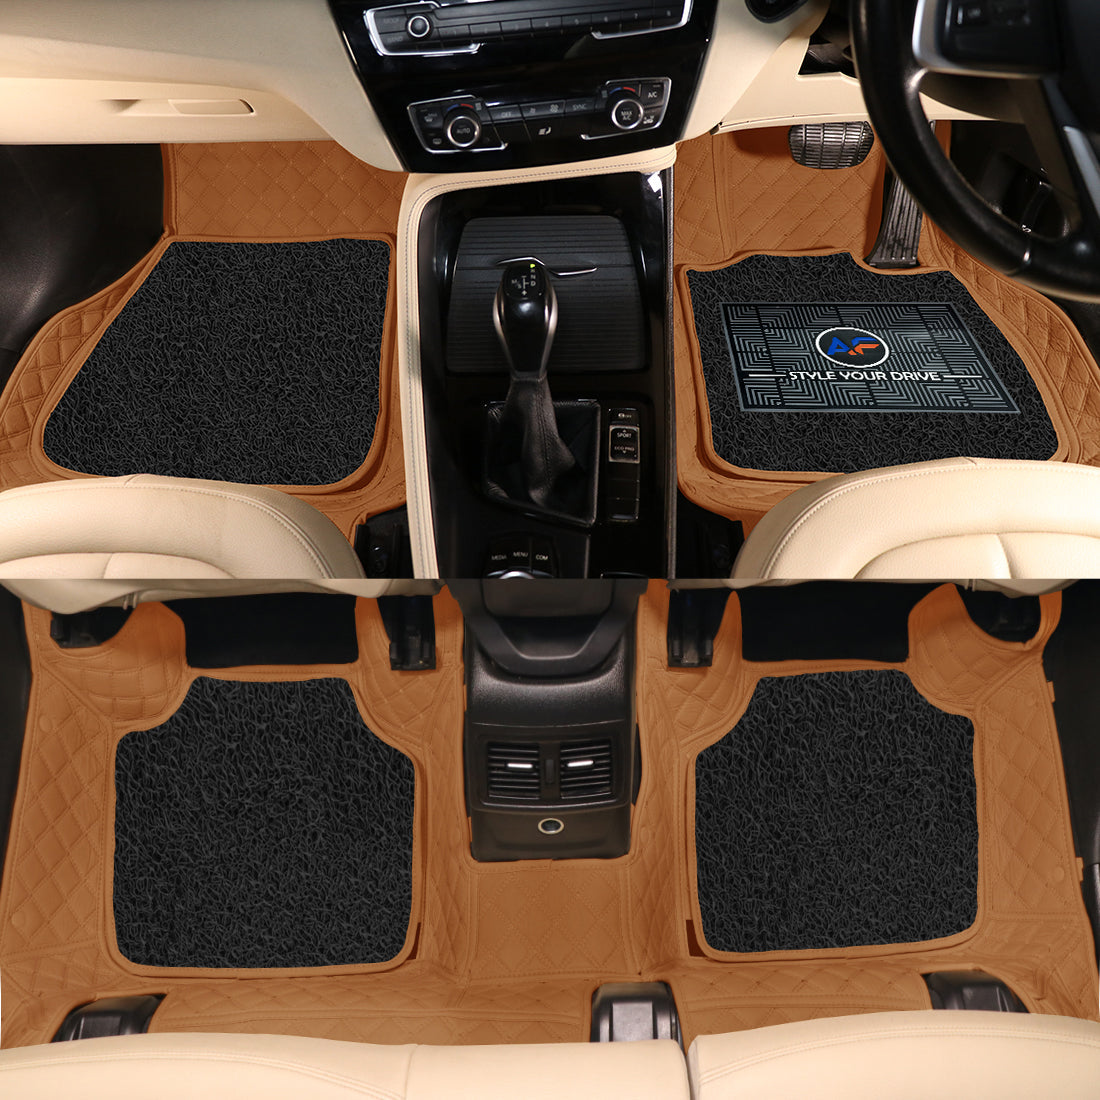 BMW X5 2018 7D Luxury Car Mat, All Weather Proof, Anti-Skid, 100% Waterproof & Odorless with Unique Diamond Fish Design (24mm Luxury PU Leather, 2 Rows)